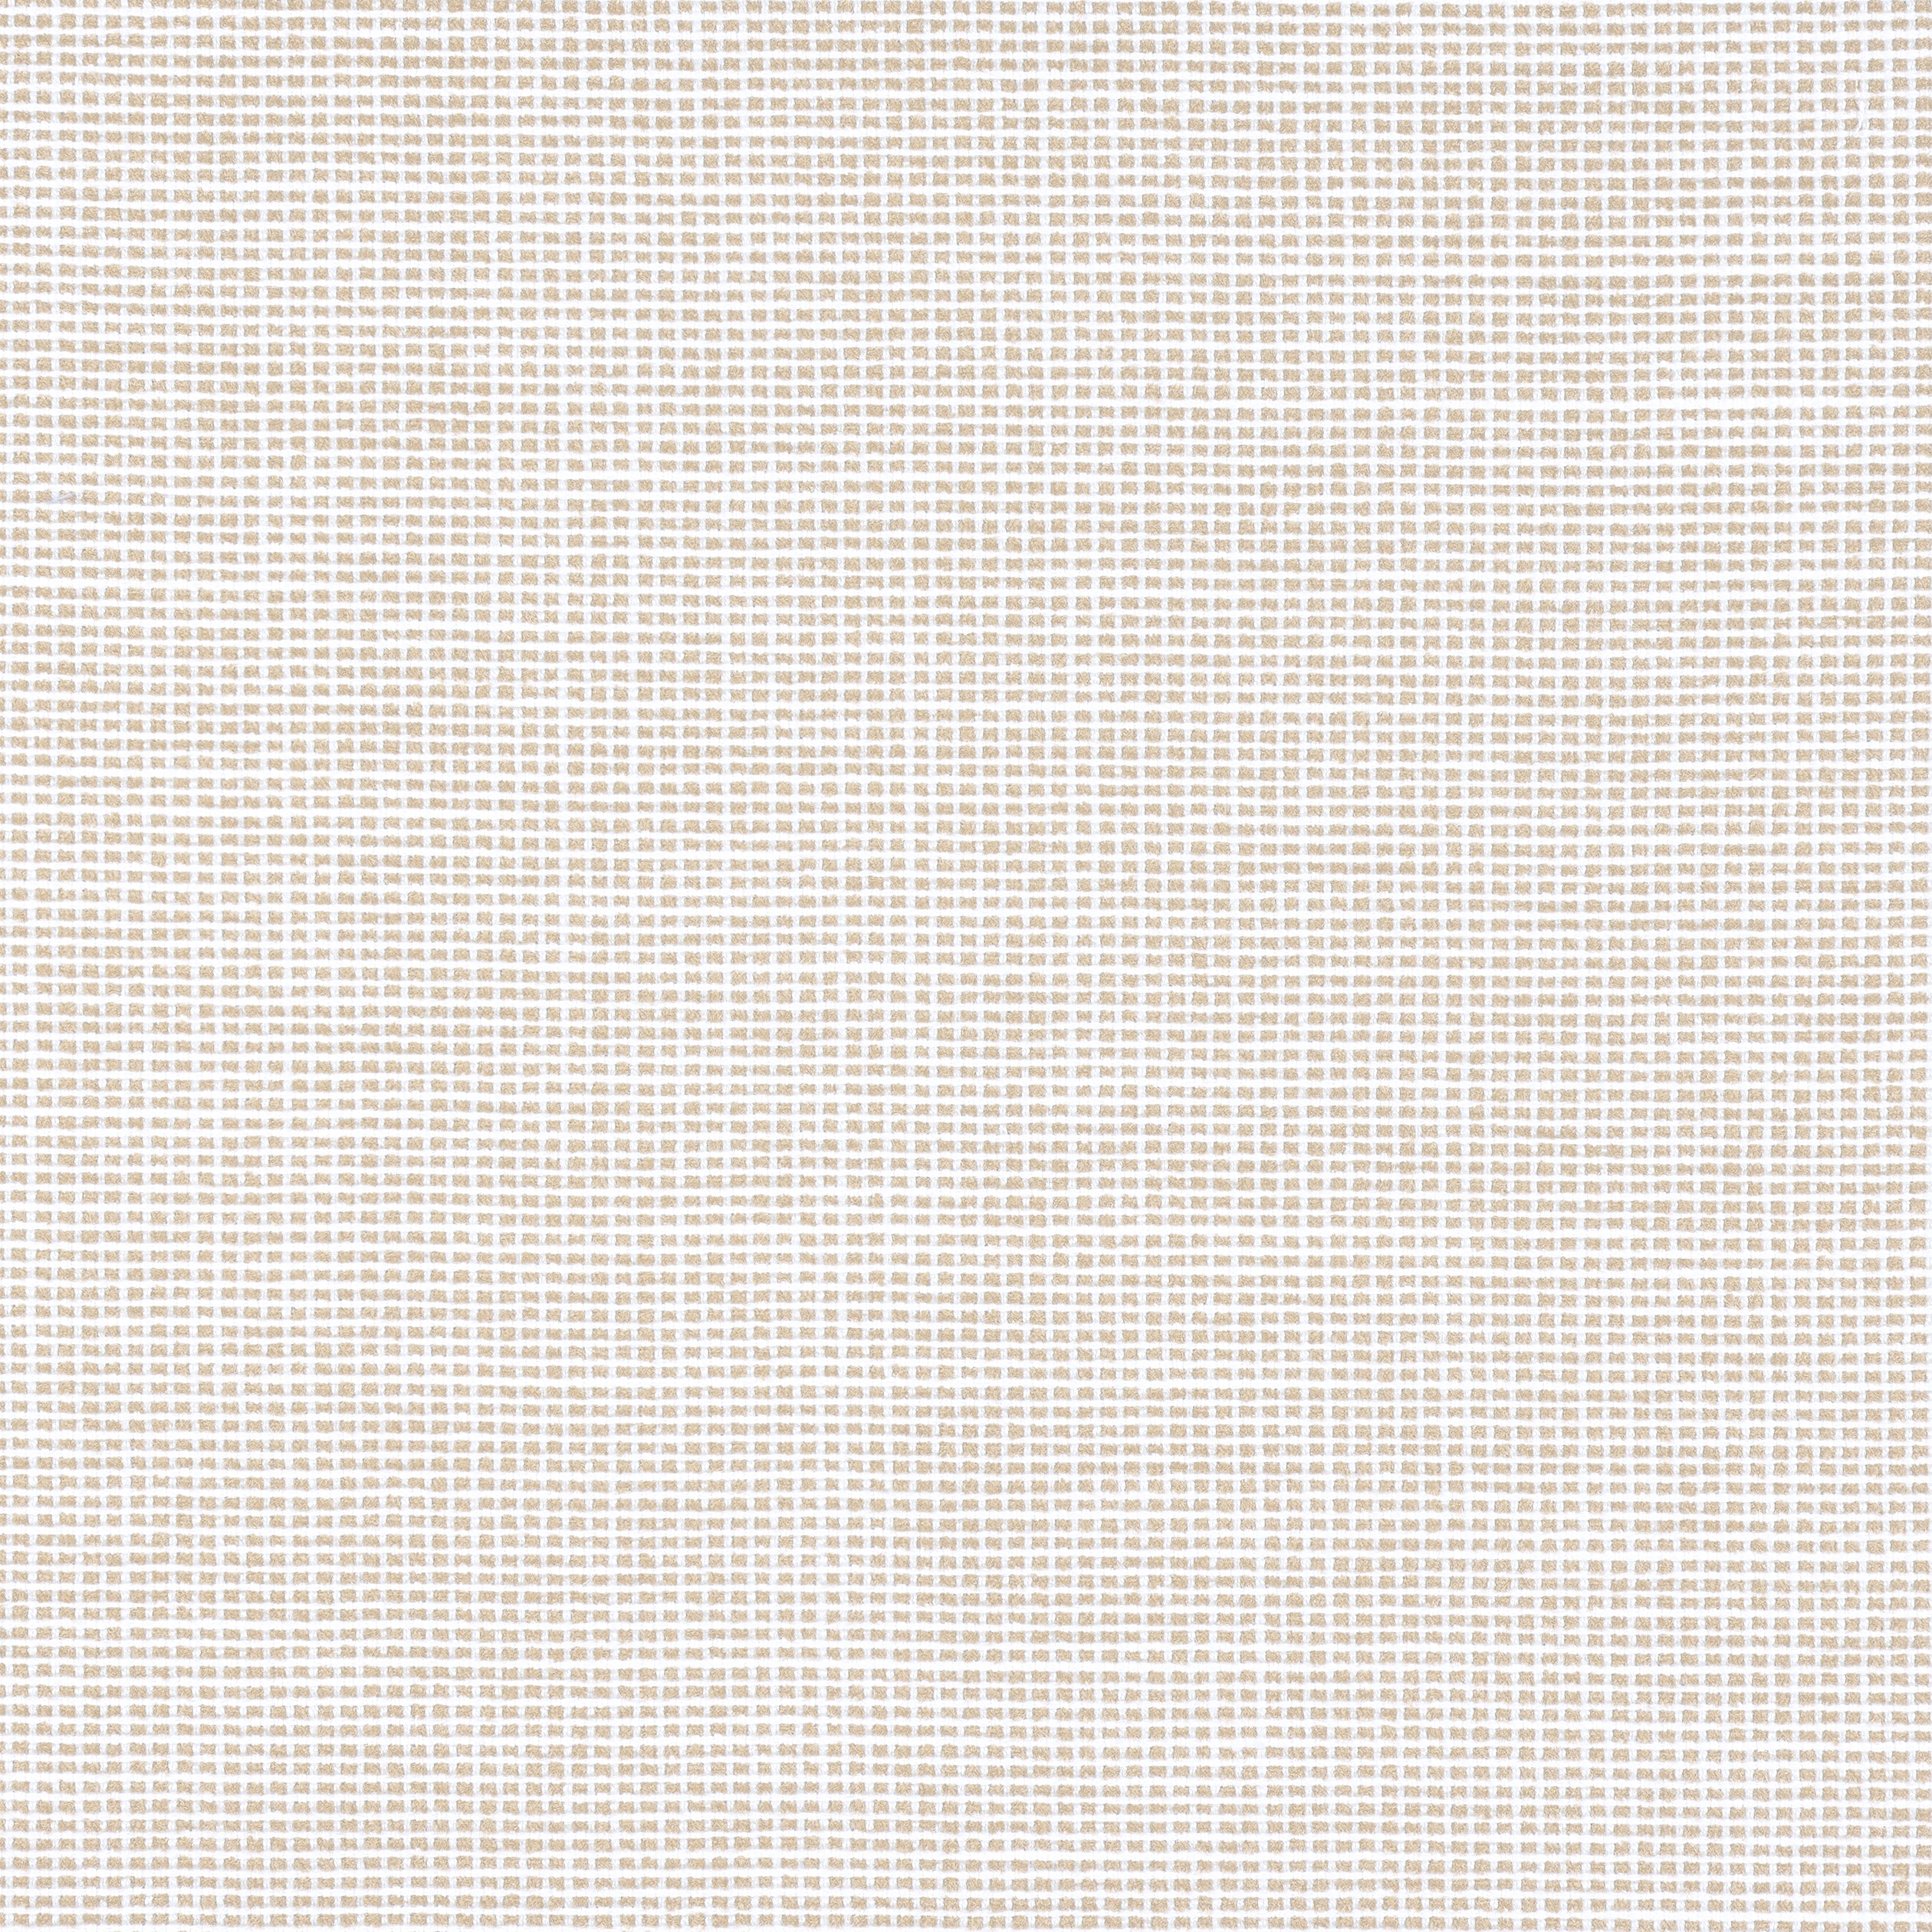 Isla fabric in sand color - pattern number W8567 - by Thibaut in the Villa Textures collection